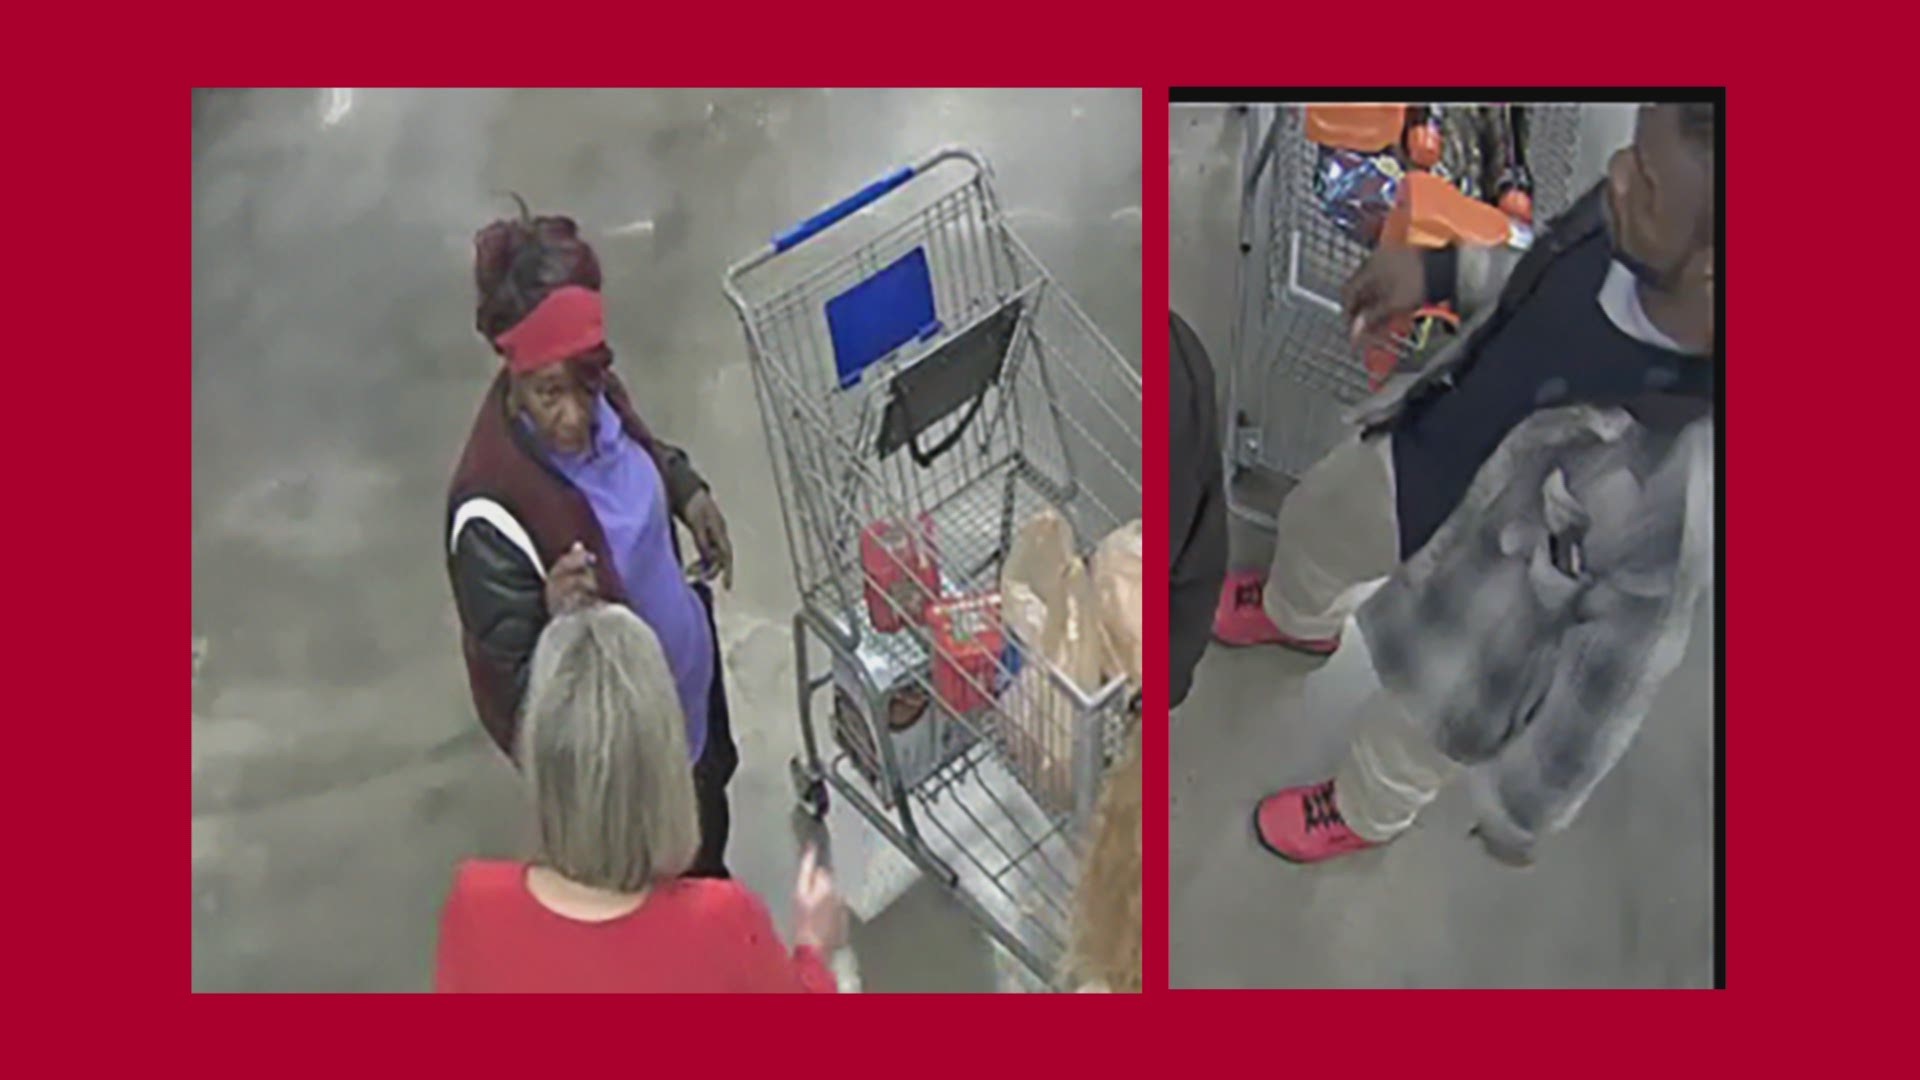 Woman throws frozen shrimp at Benton Kroger employee, police searching for suspects